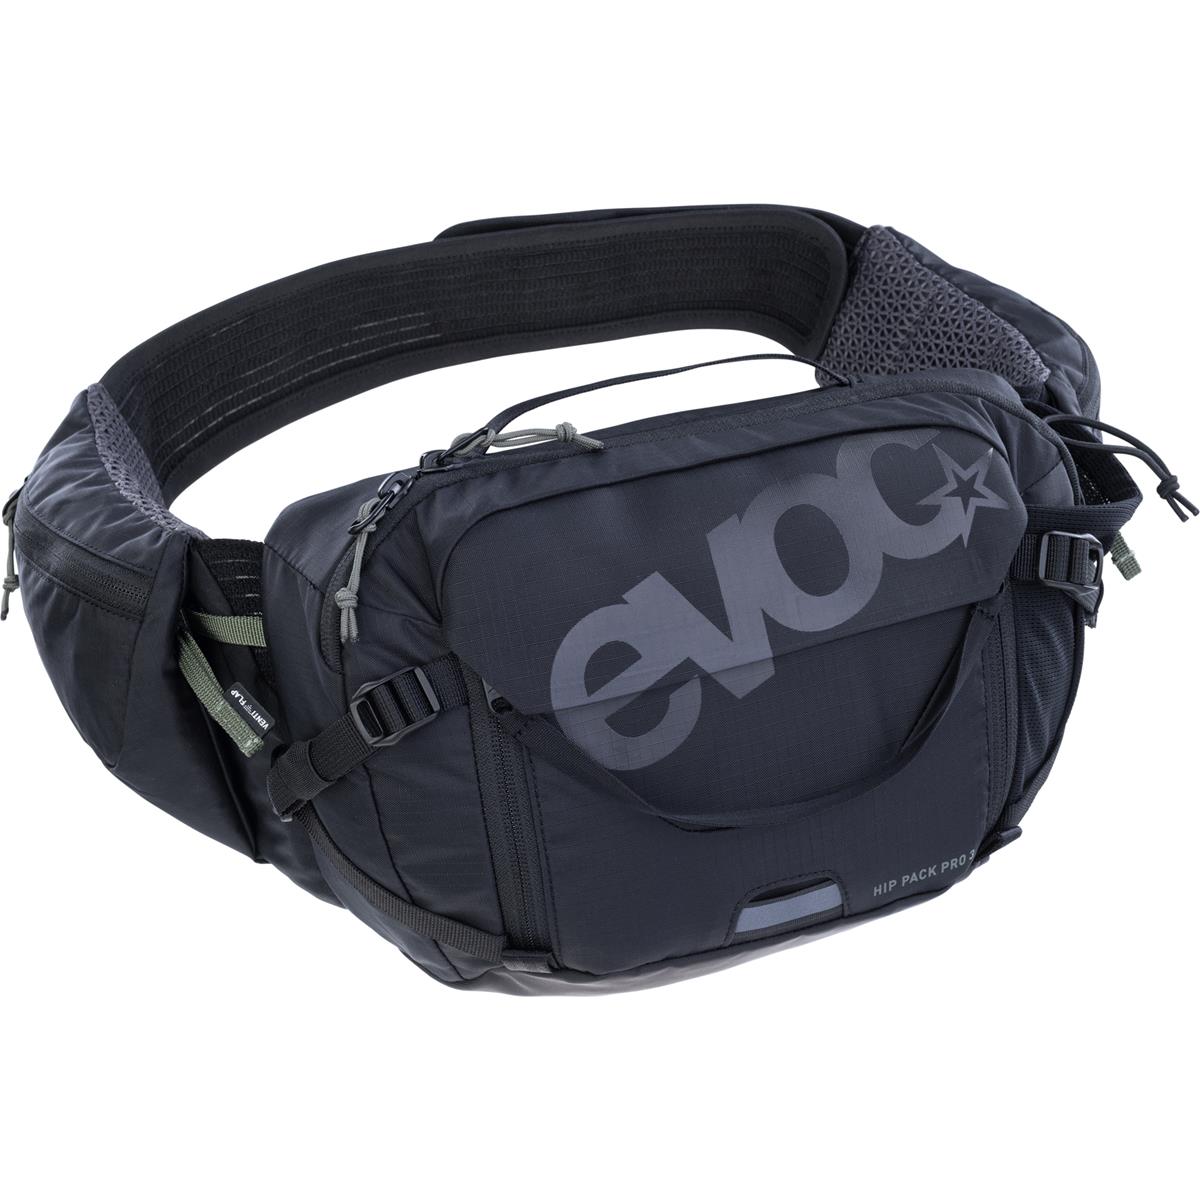 Evoc Hip Pack with Hydration System 1.5 Liters Hip Pack Pro 3 + Black